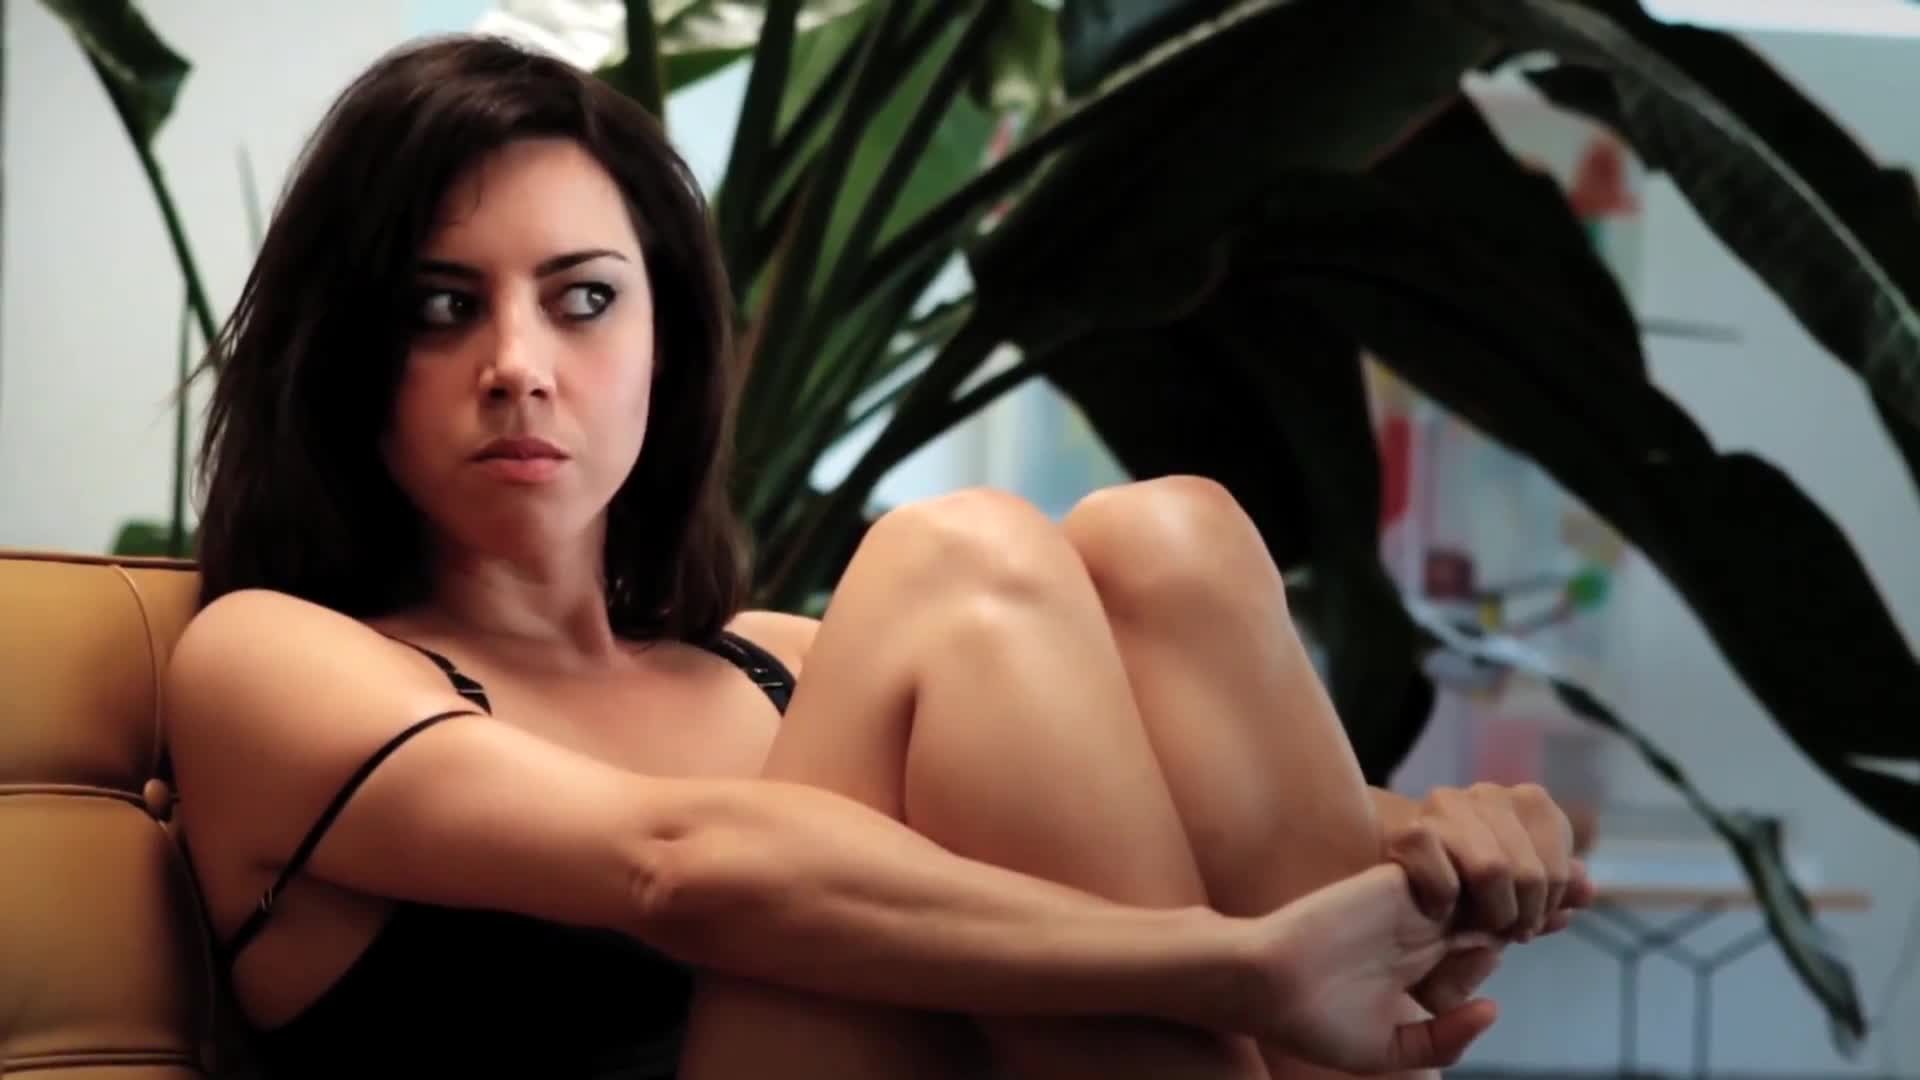 Sexy 80 Photoes of Aubrey Plaza - Smoking and Sexing.